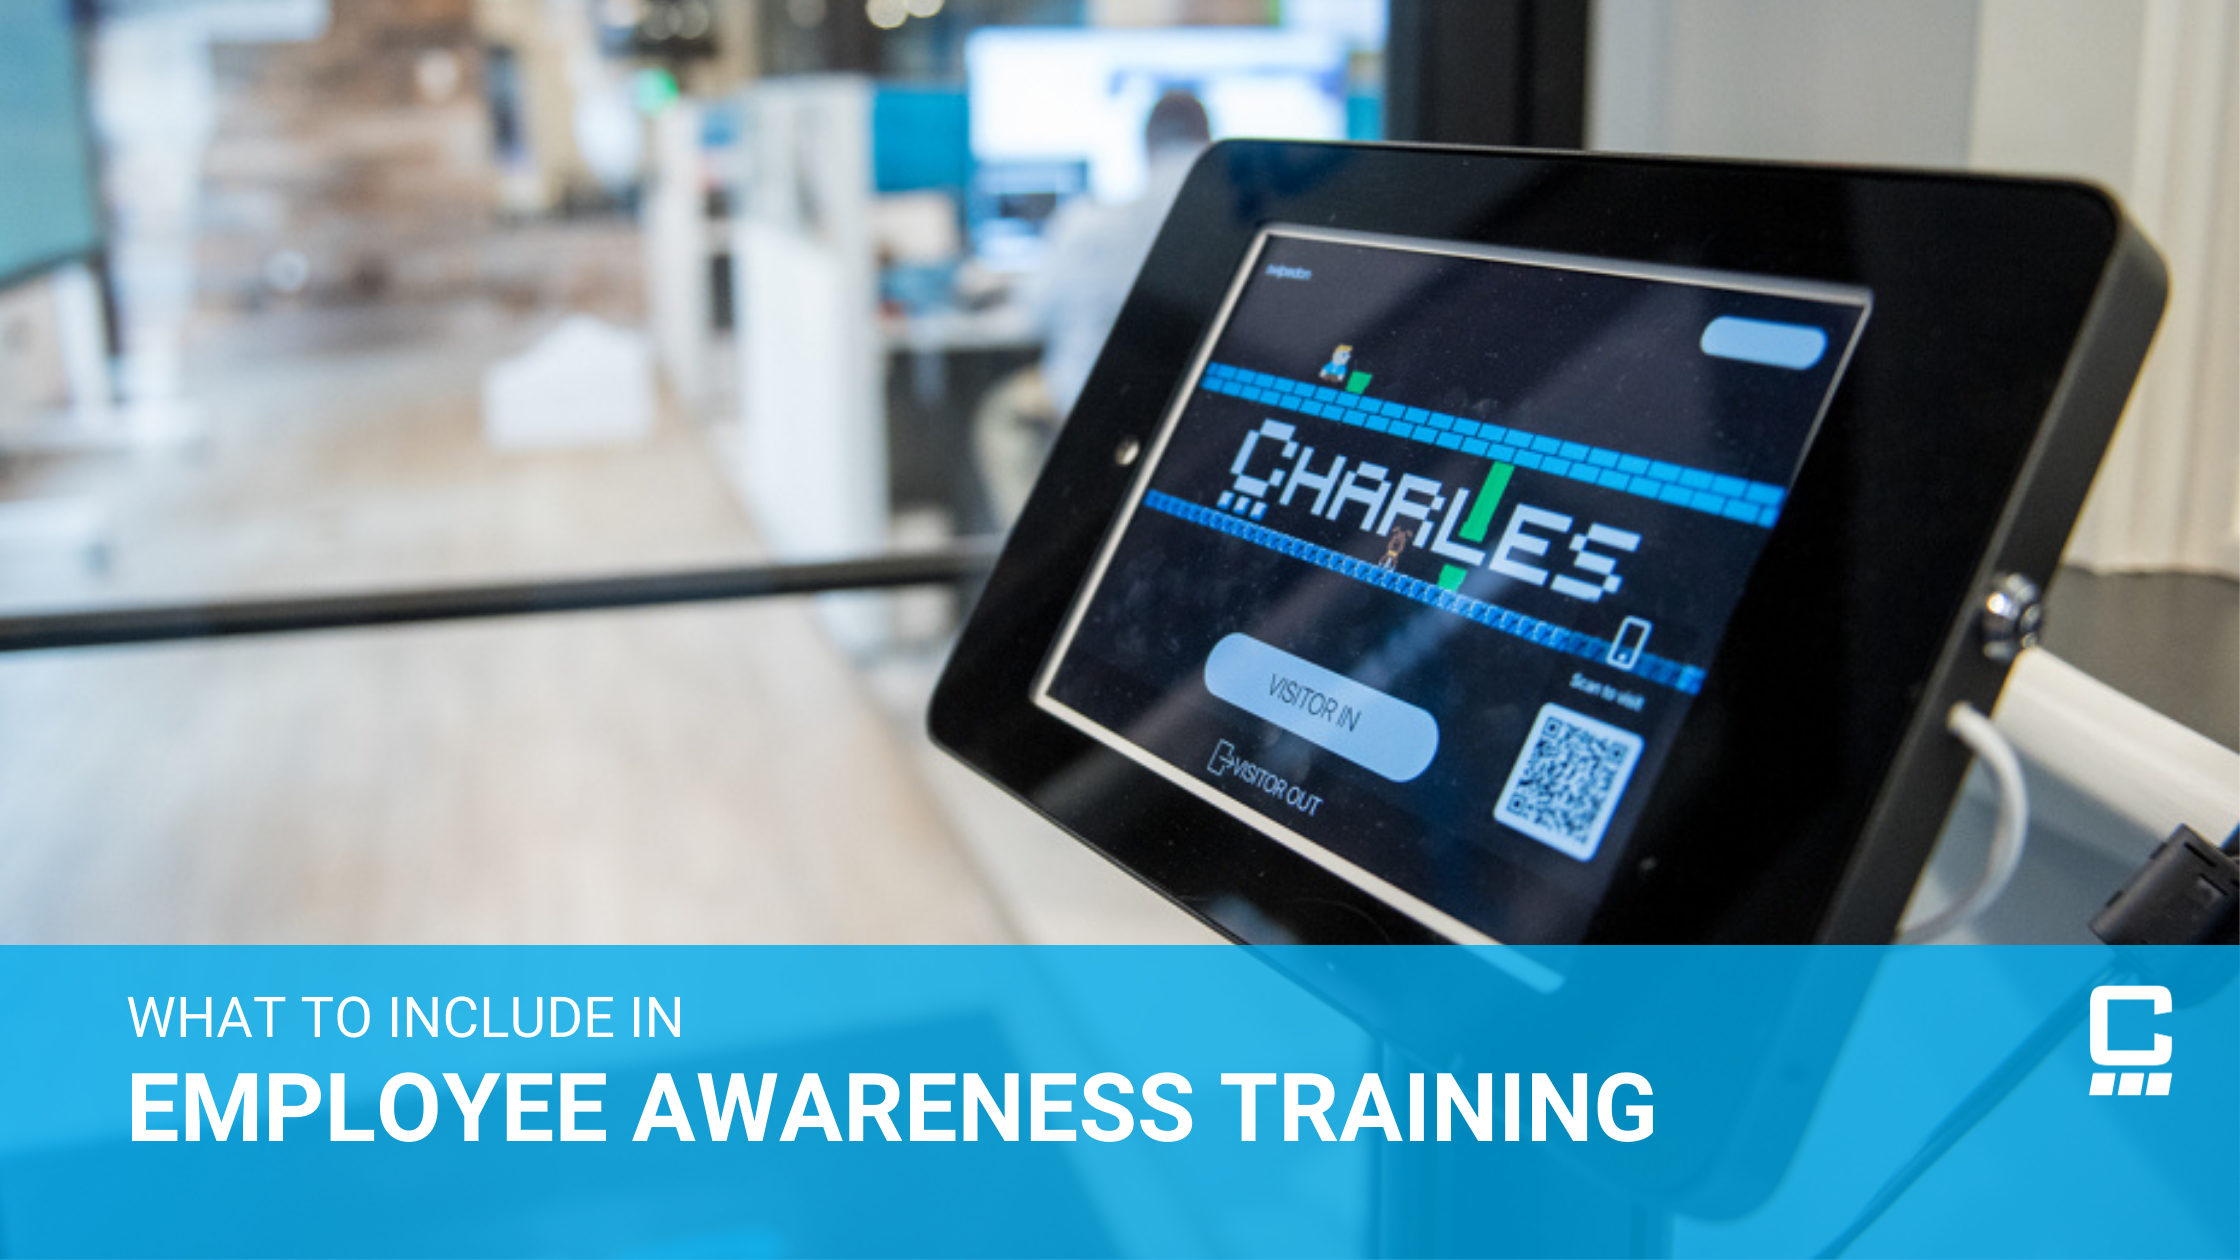 What to Include in Employee Awareness Training